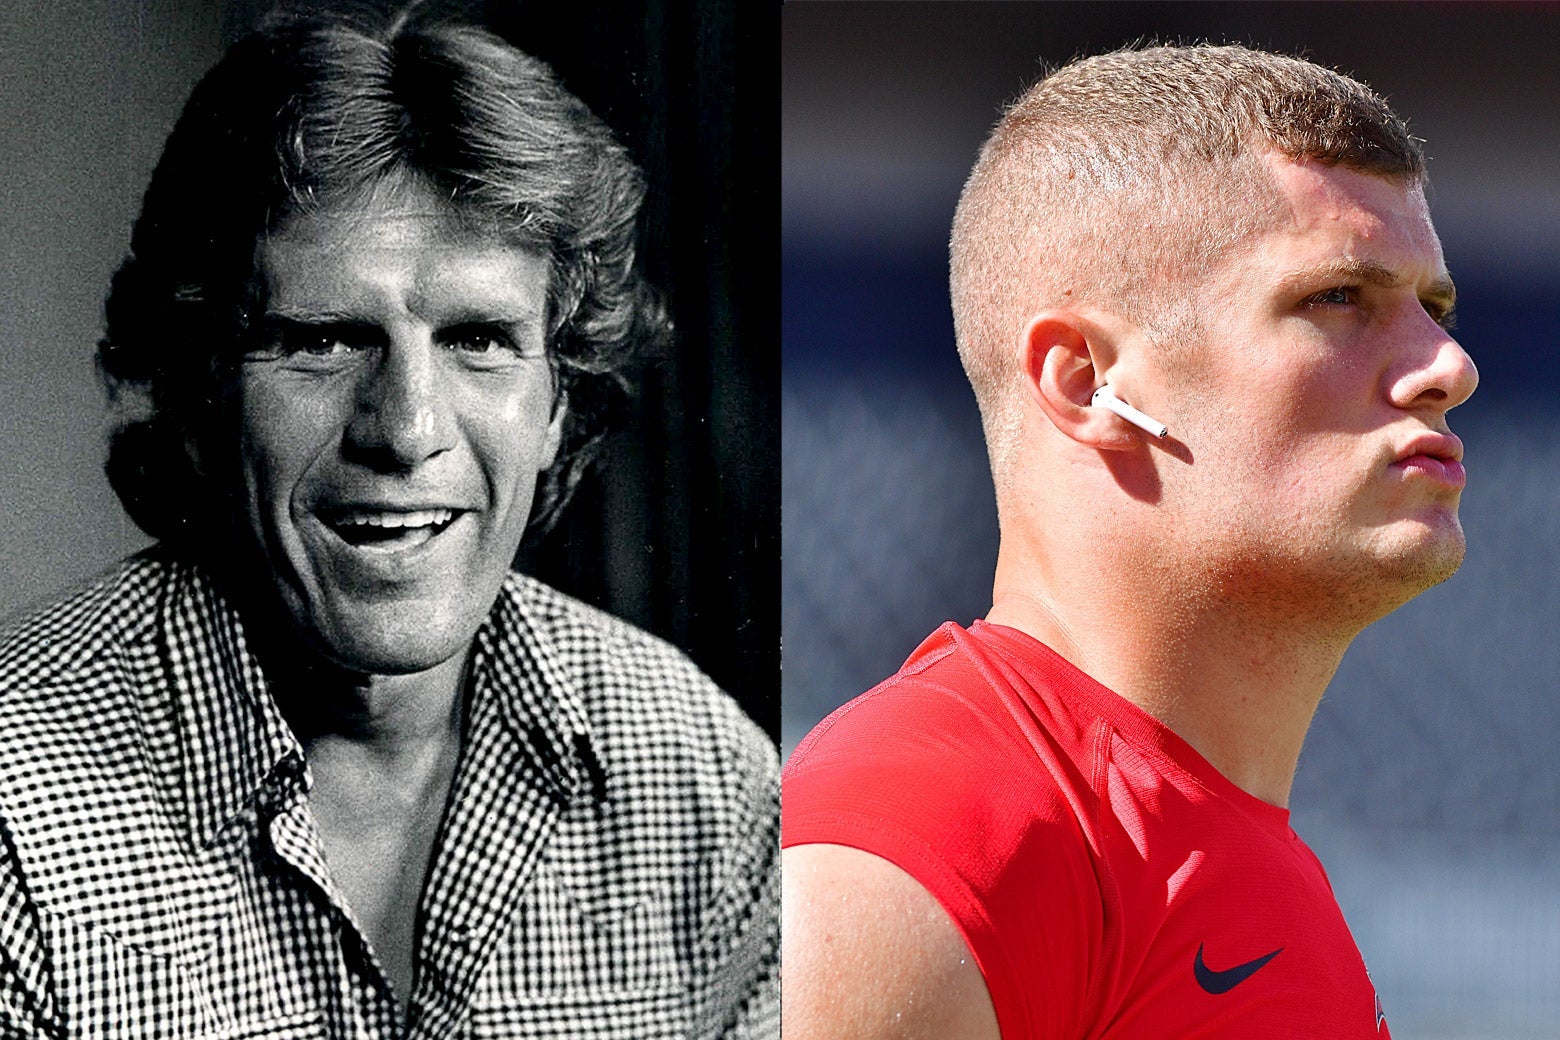 Left: Archival photo of Dave Kopay smiling in the 1970s. Right: Carl Nassib in profile, looking straight-faced with an earbud in his ear.